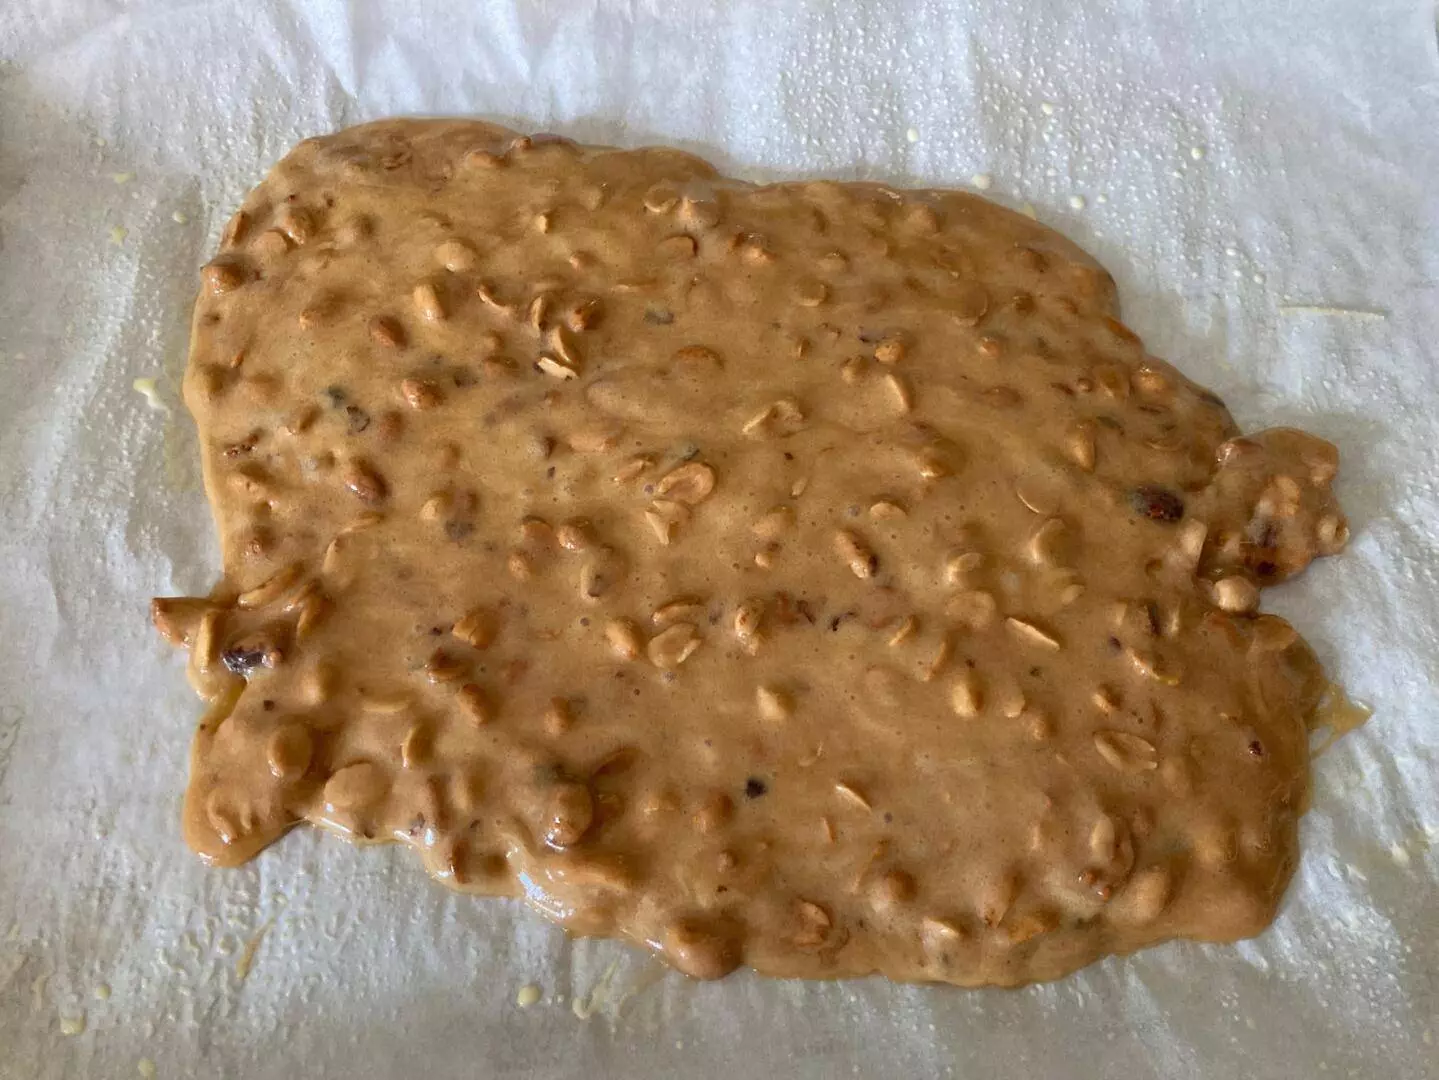 Easy Peanut Brittle from Out of the Box Baking.com